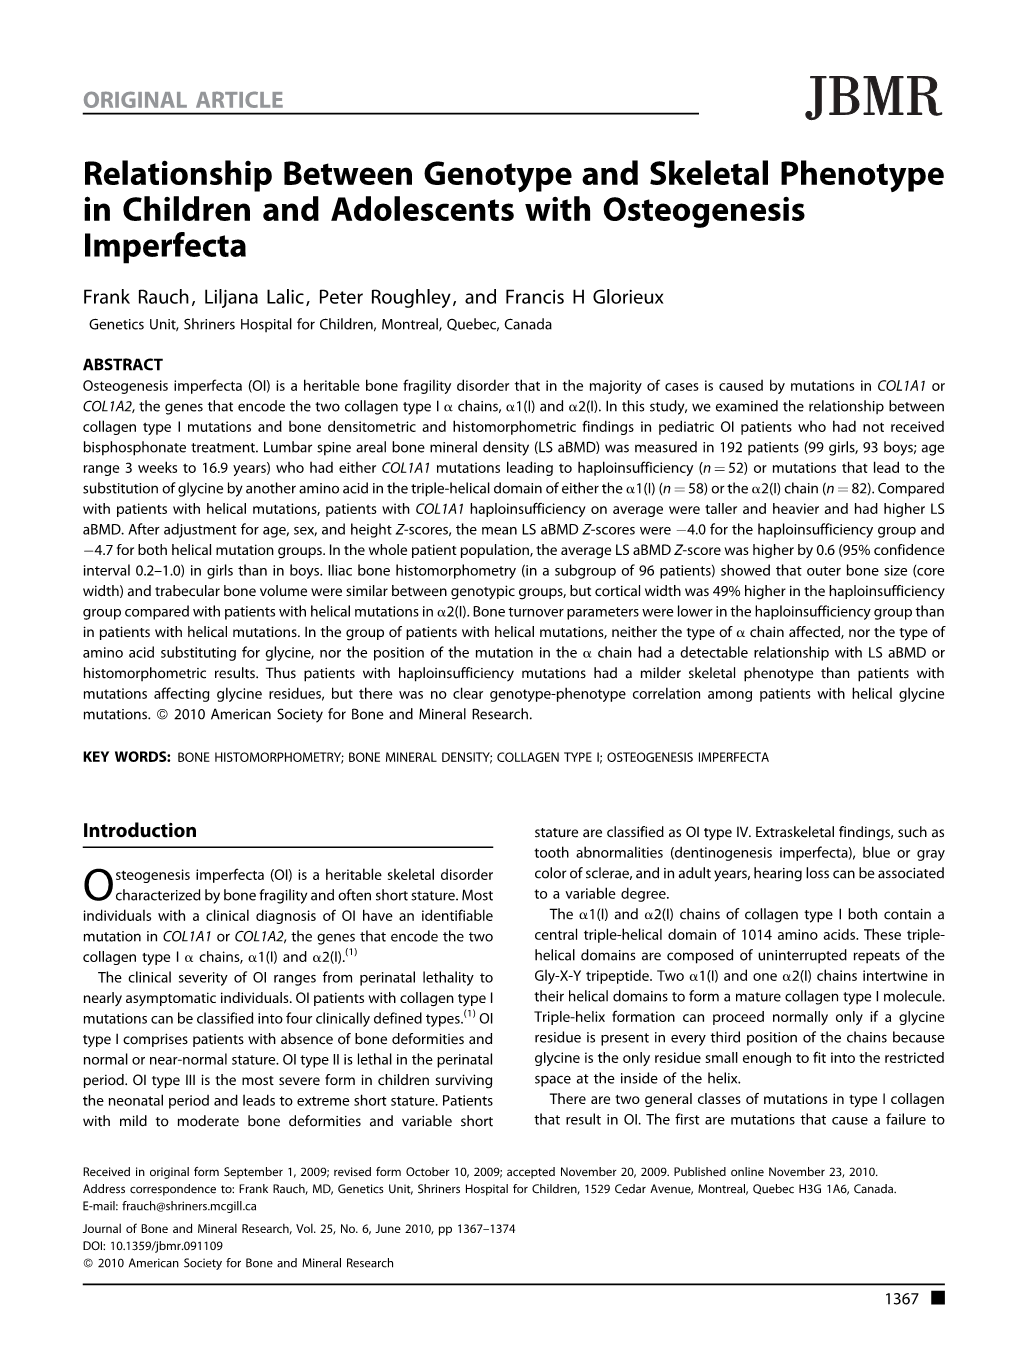 Relationship Between Genotype and Skeletal Phenotype in Children and Adolescents with Osteogenesis Imperfecta